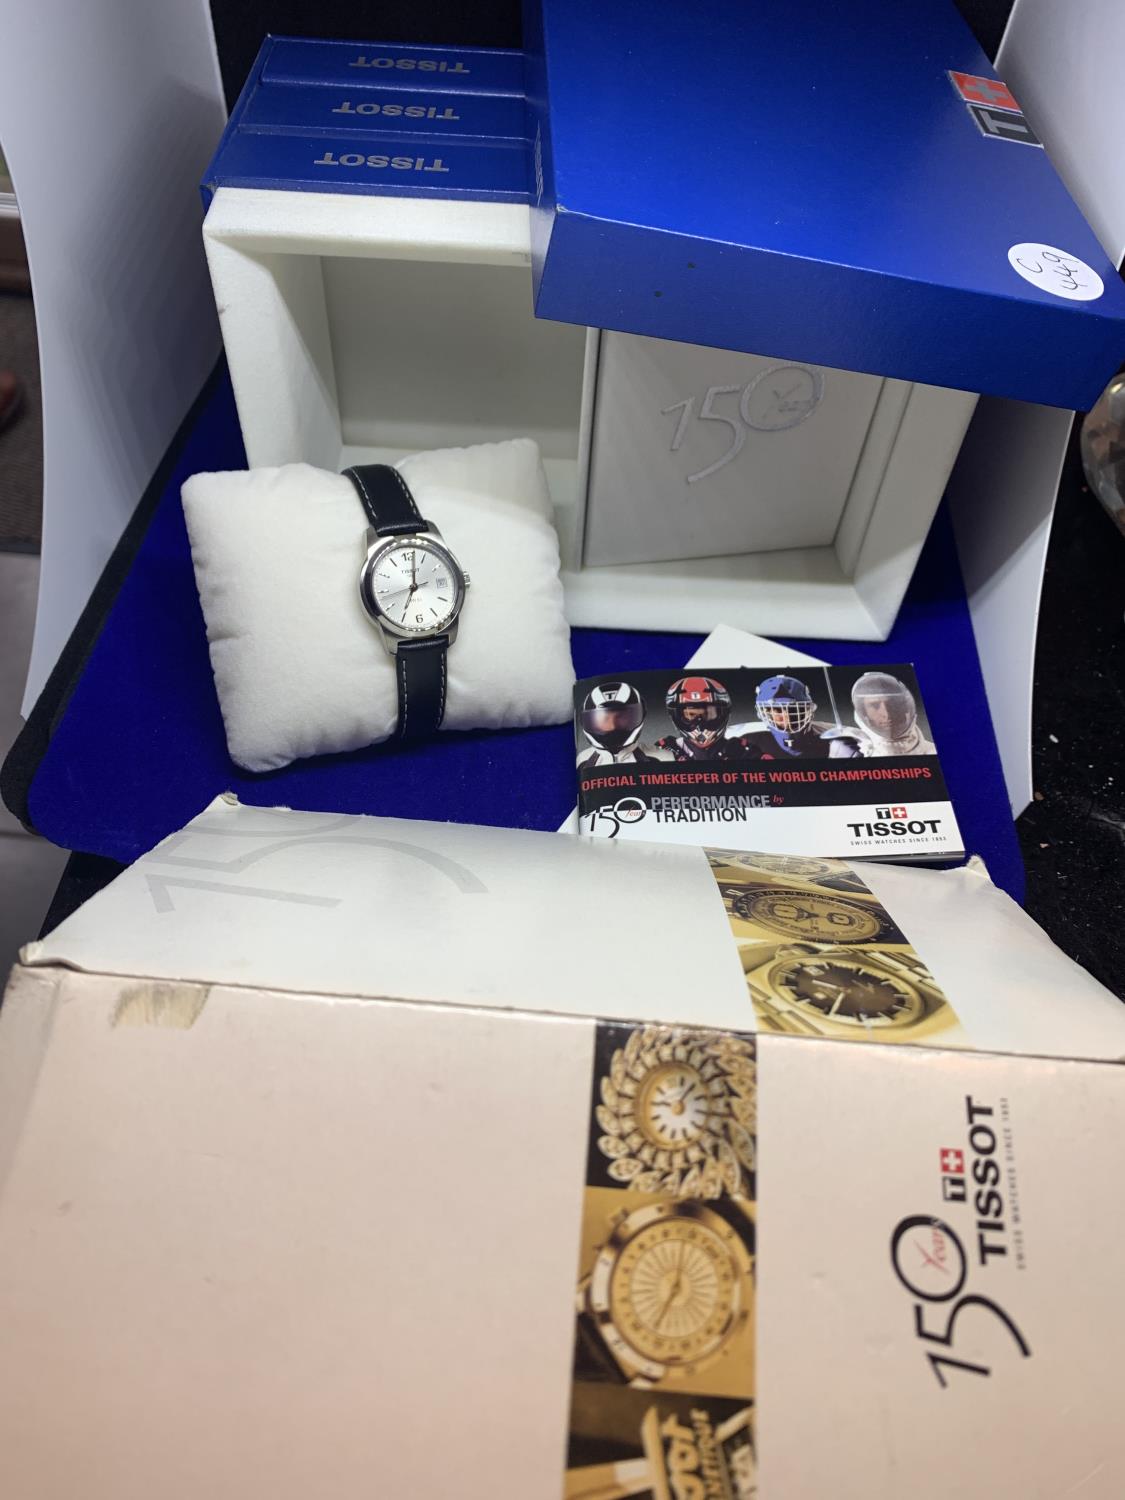 A TISSOT 150 YEARS LADIES WATCH IN PRESENTATION BOX WITH THE HISTORY OF TISSOT BOOK ETC